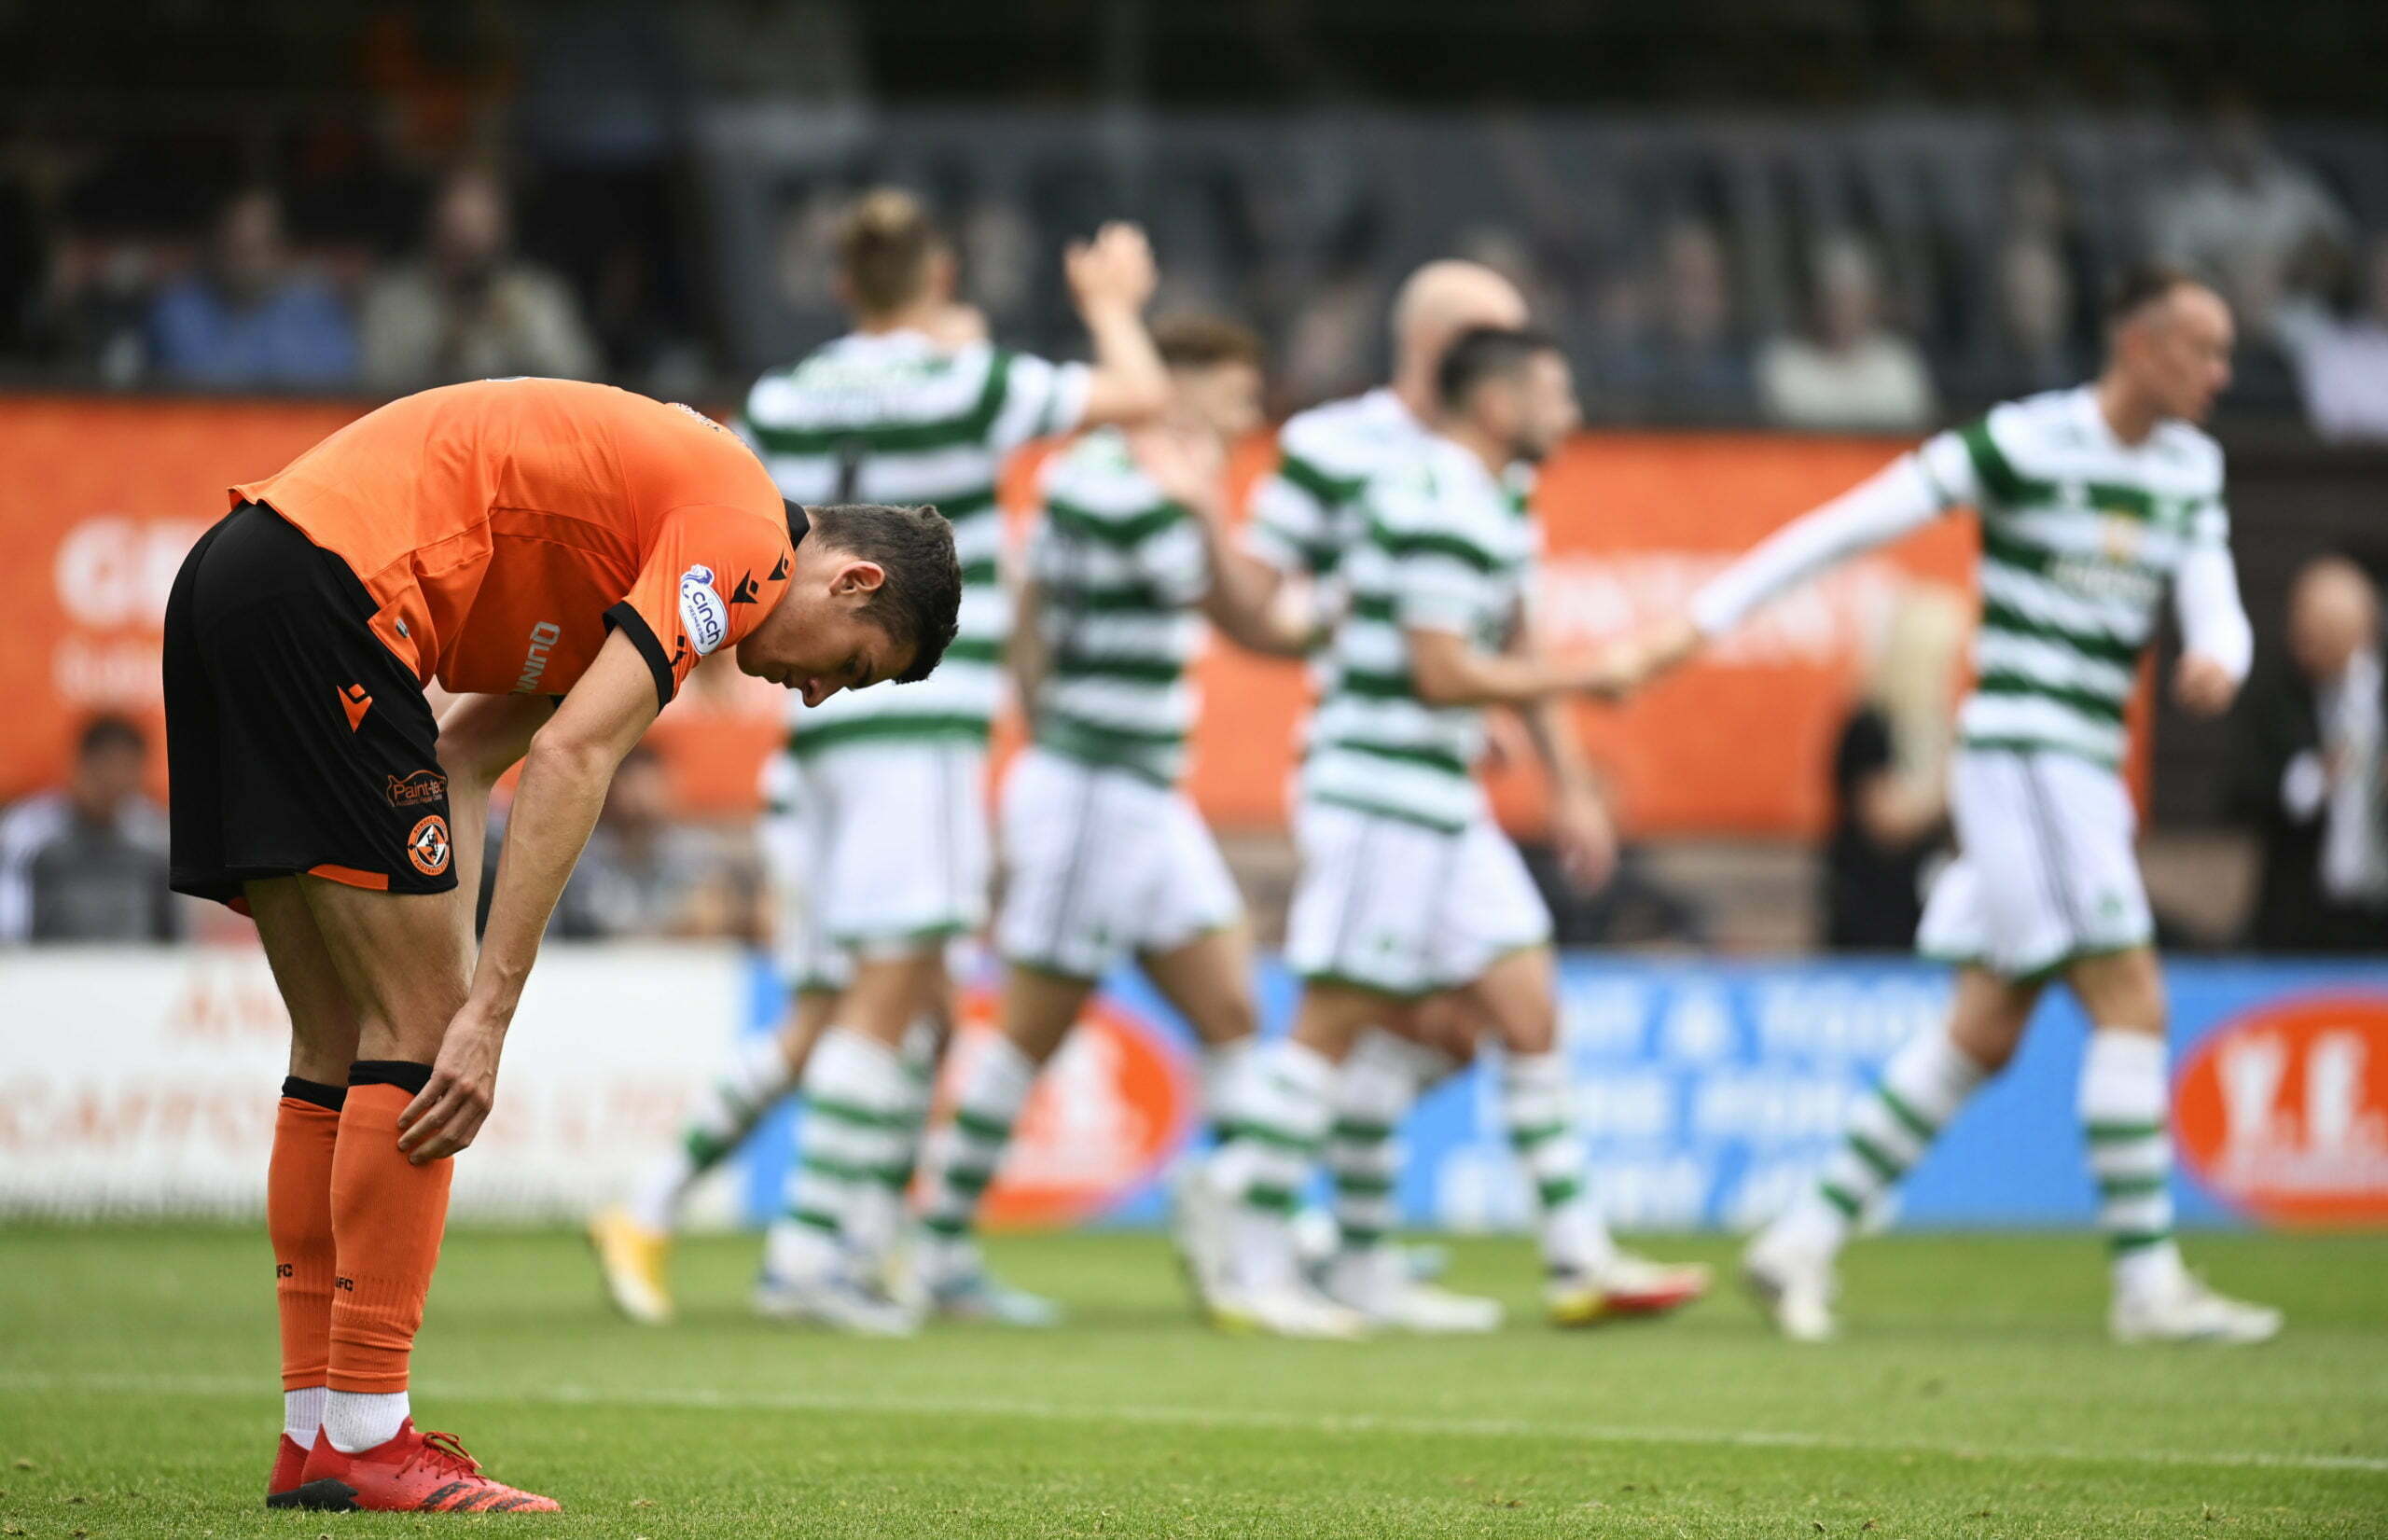 Dundee United 0-9 Celtic Match Report